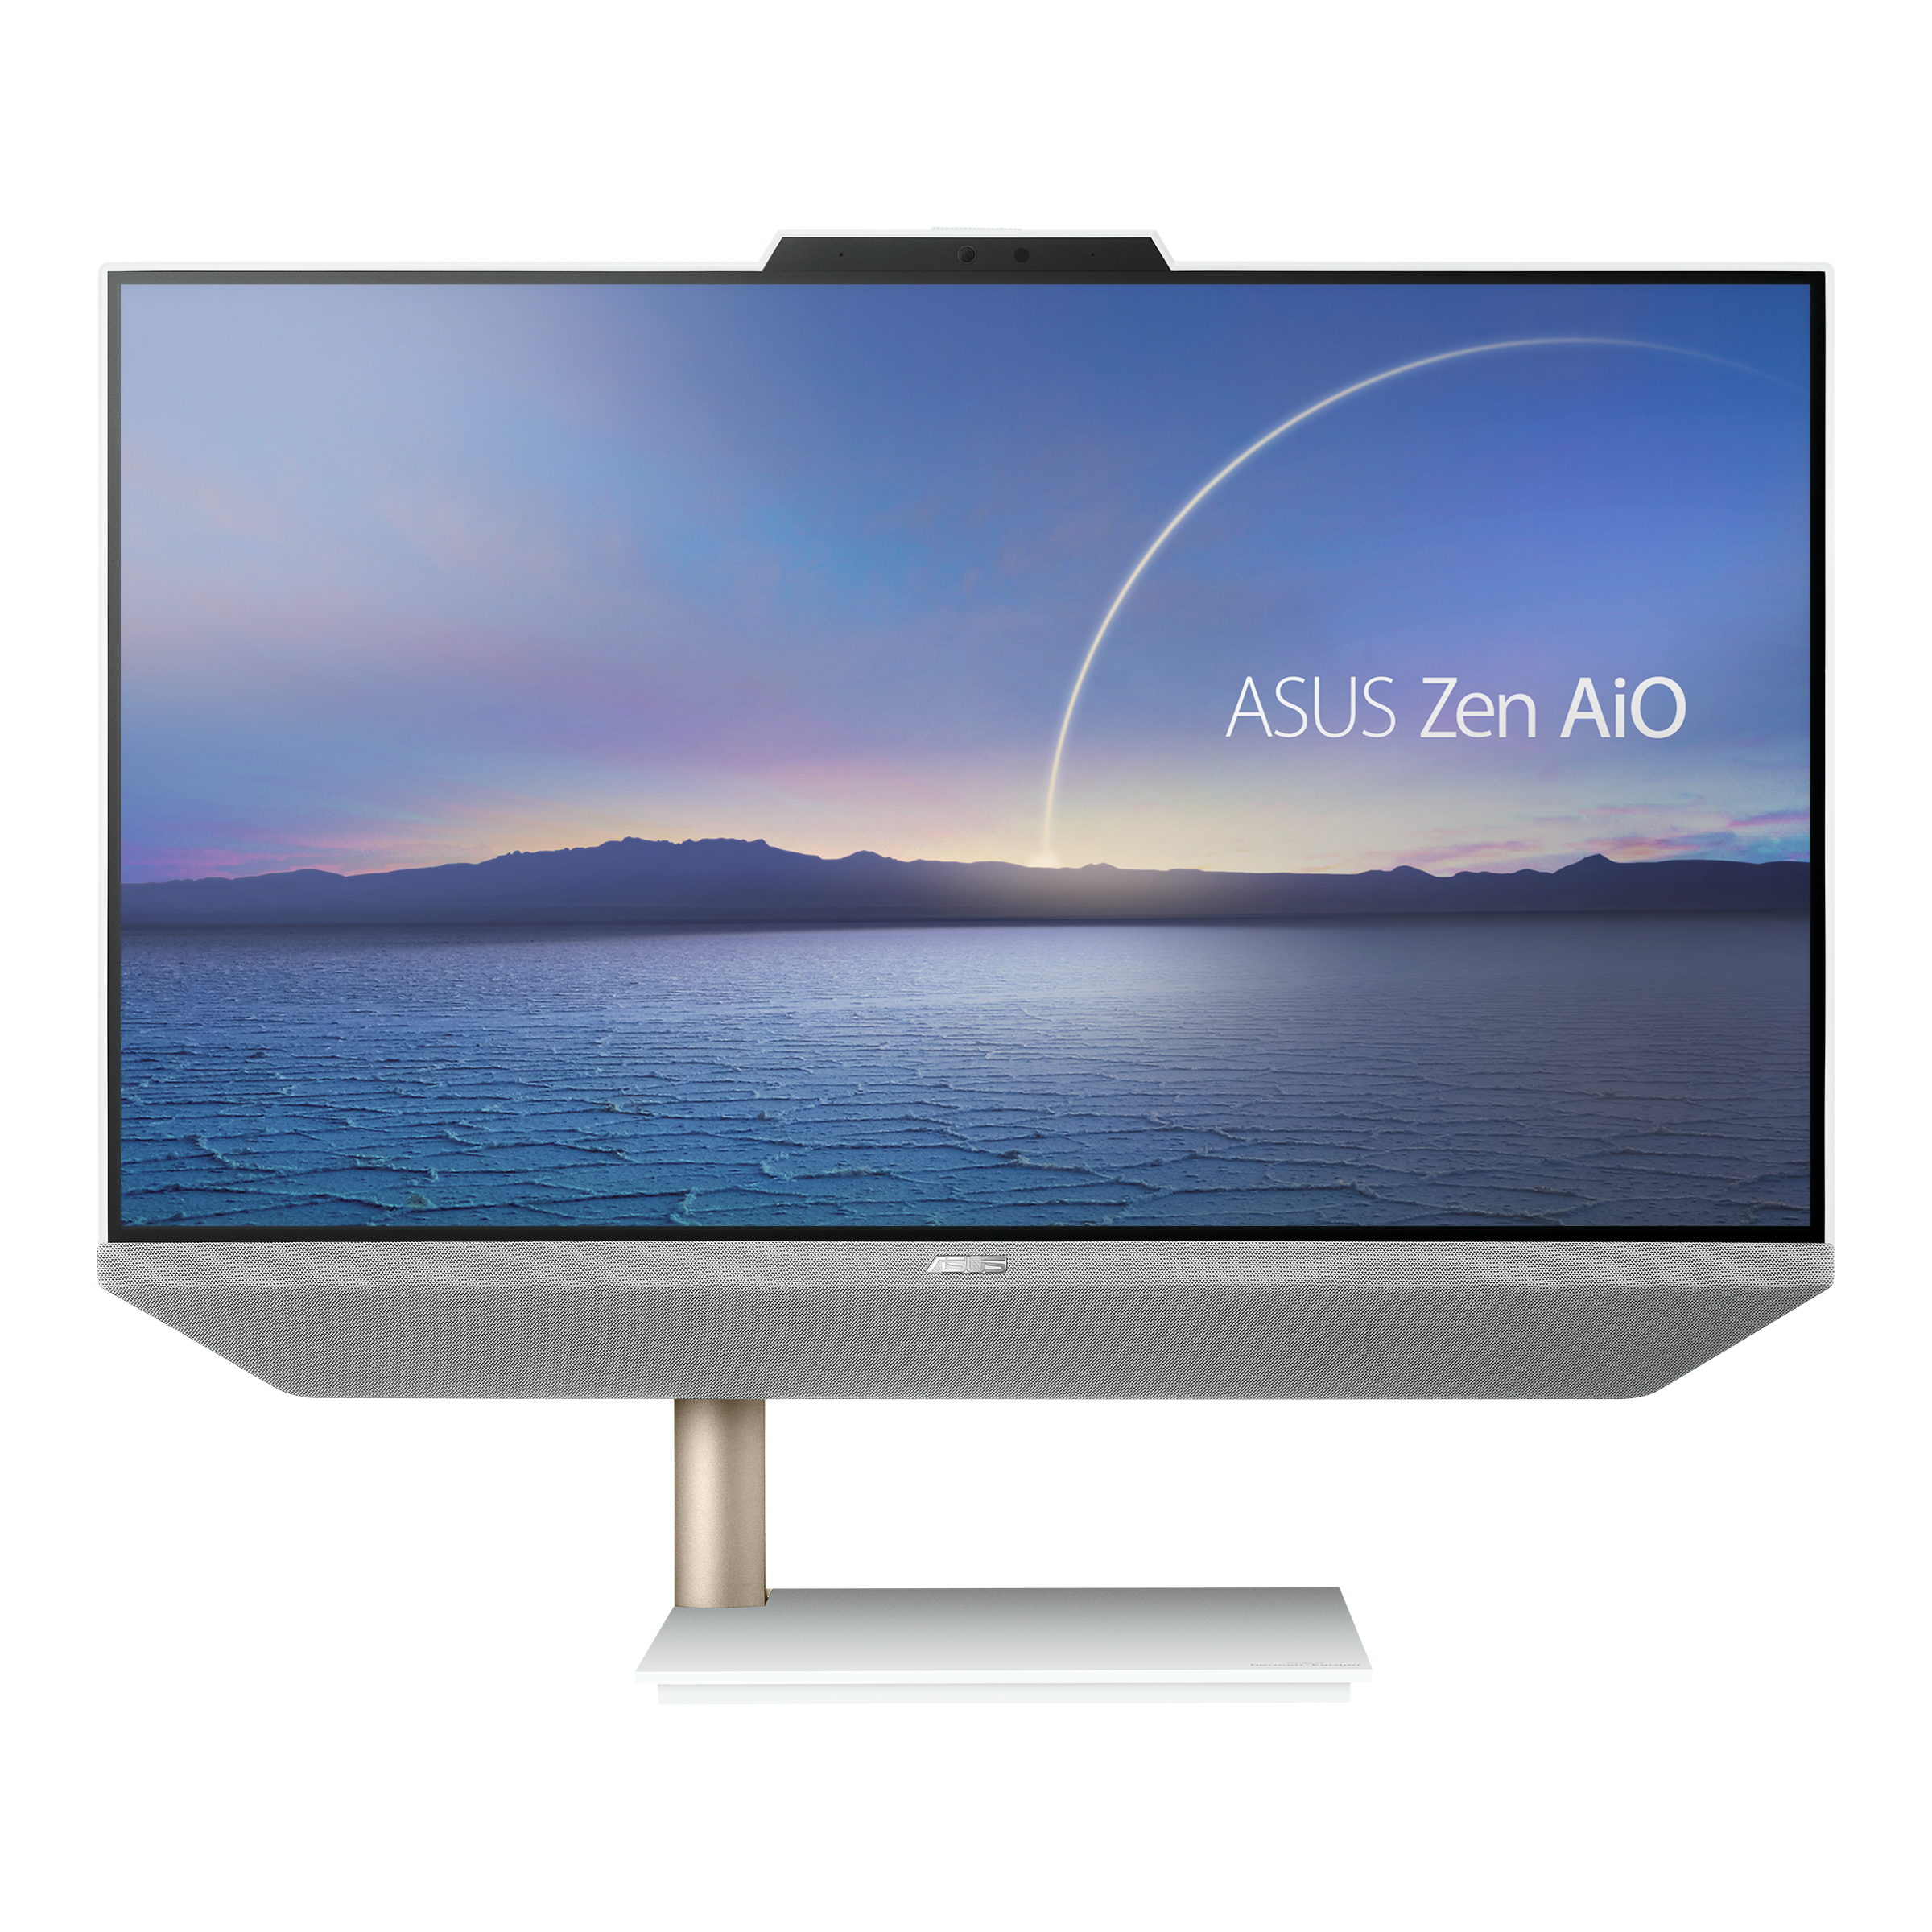 Zen AiO｜All-in-One PCs｜ASUS Global